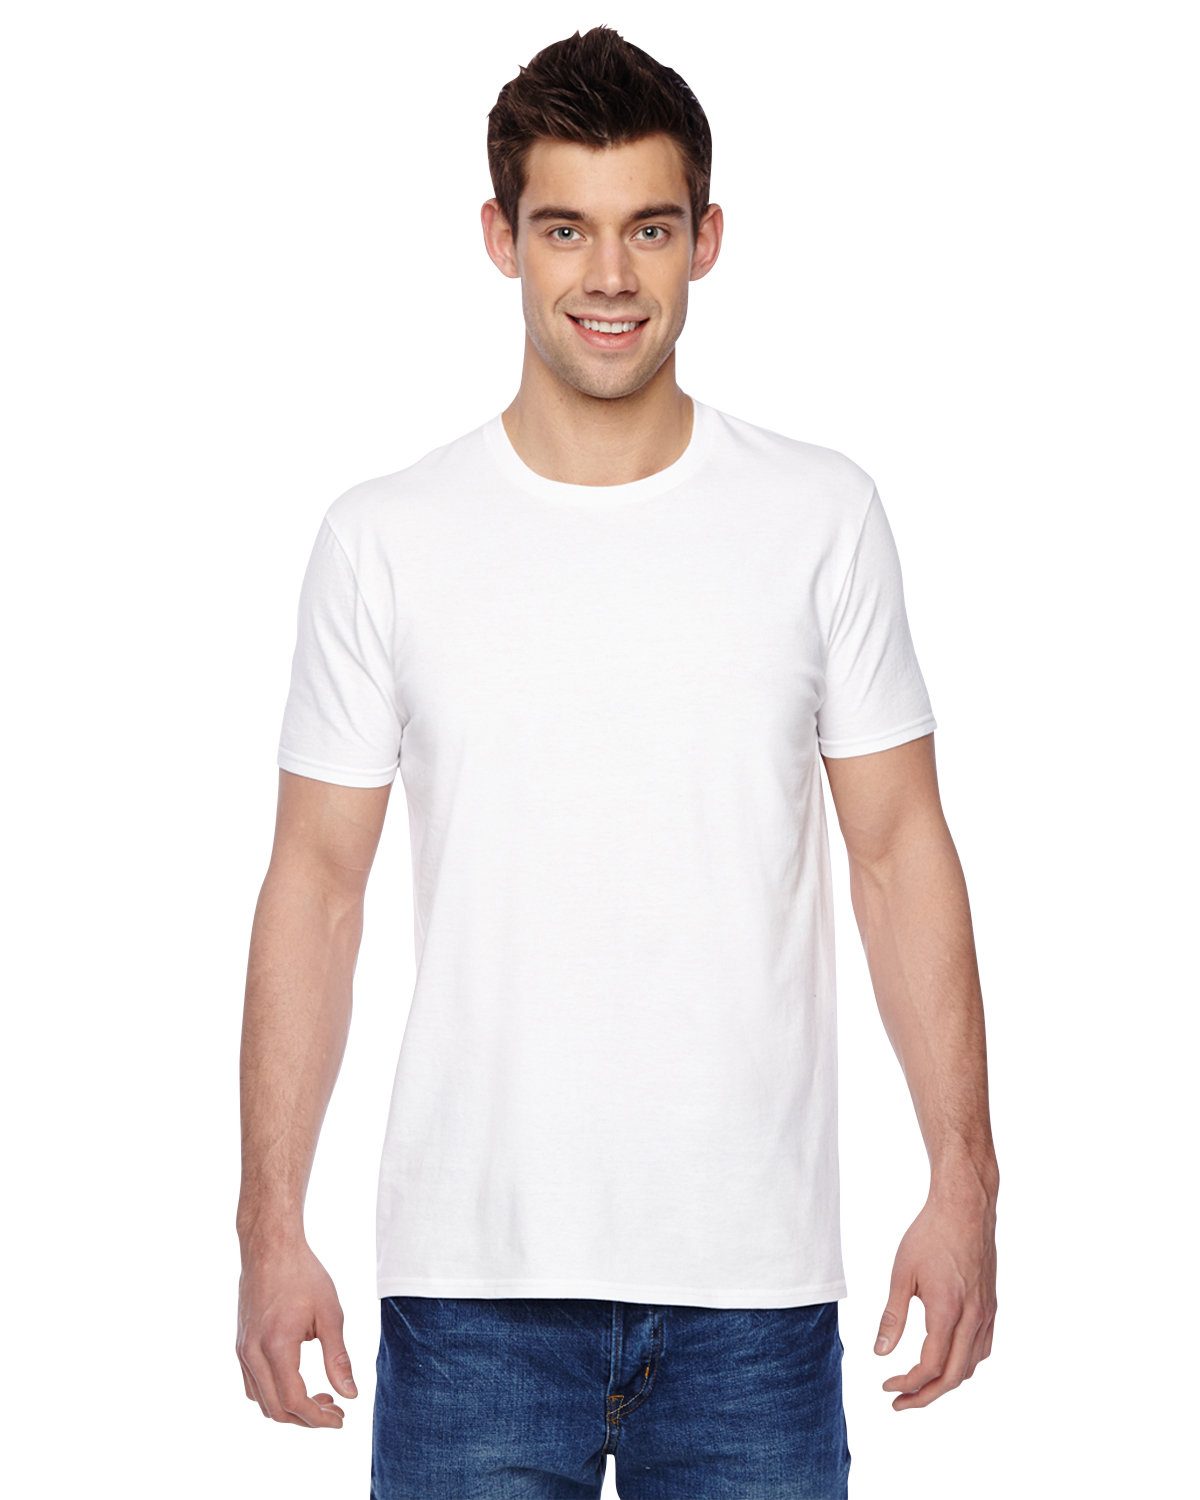 Fruit of the Loom Adult Sofspun® Jersey Crew T-Shirt WHITE 